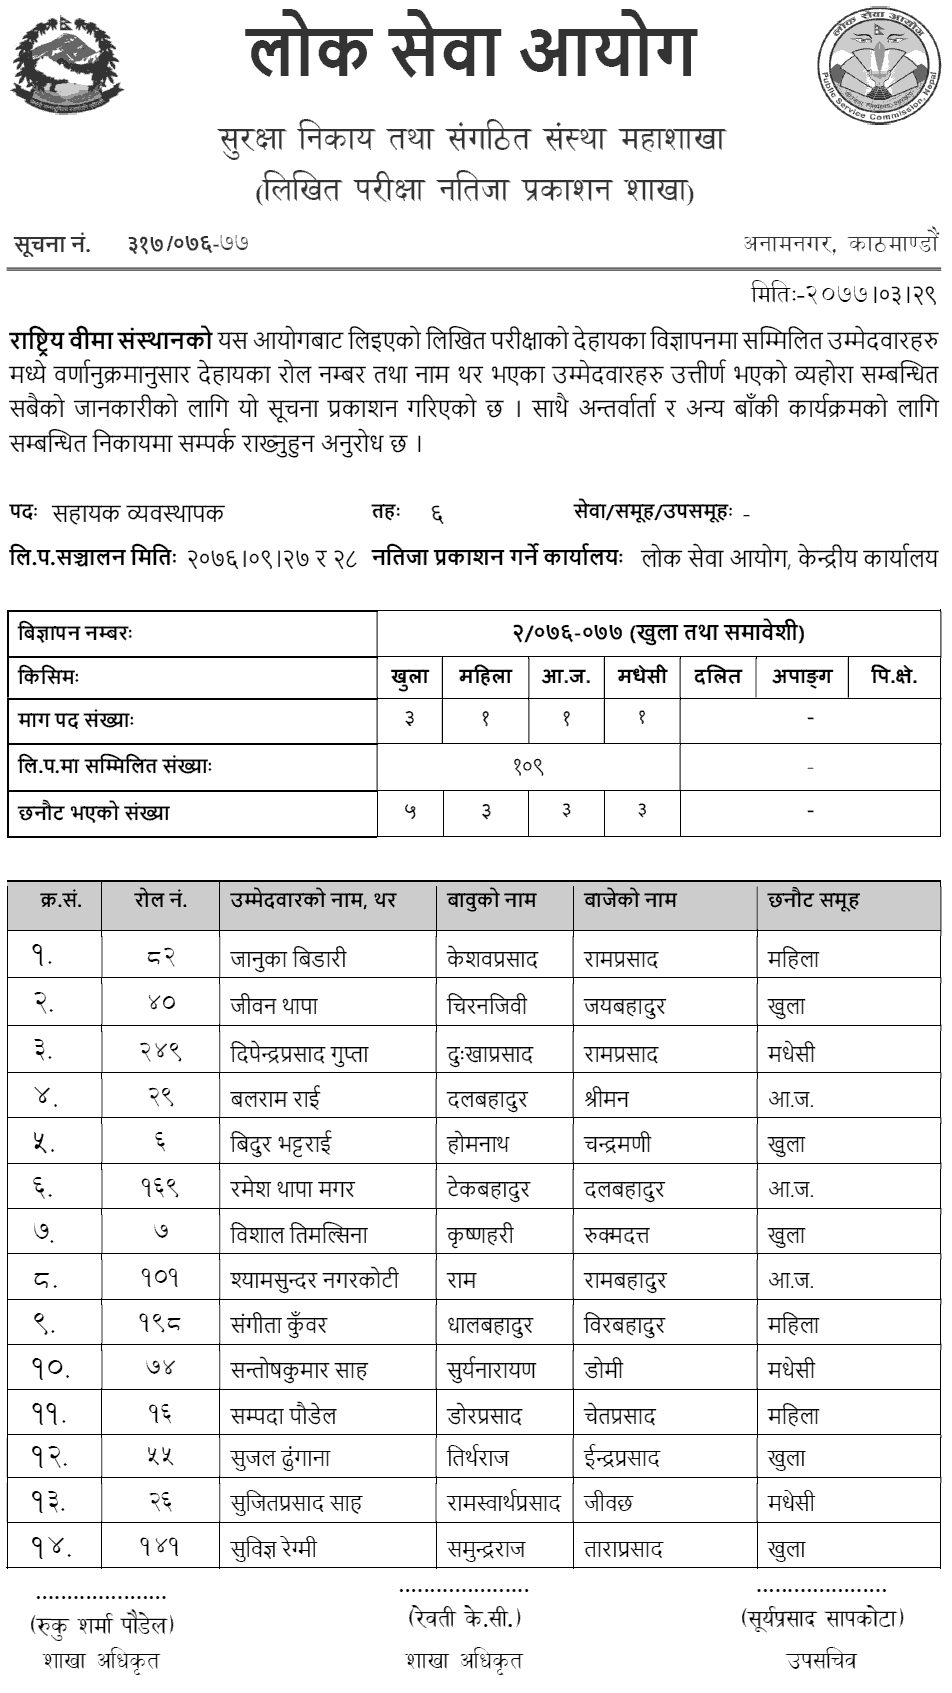 Rastriya Beema Sansthan Written Exam Result of 4th and 6th Positions